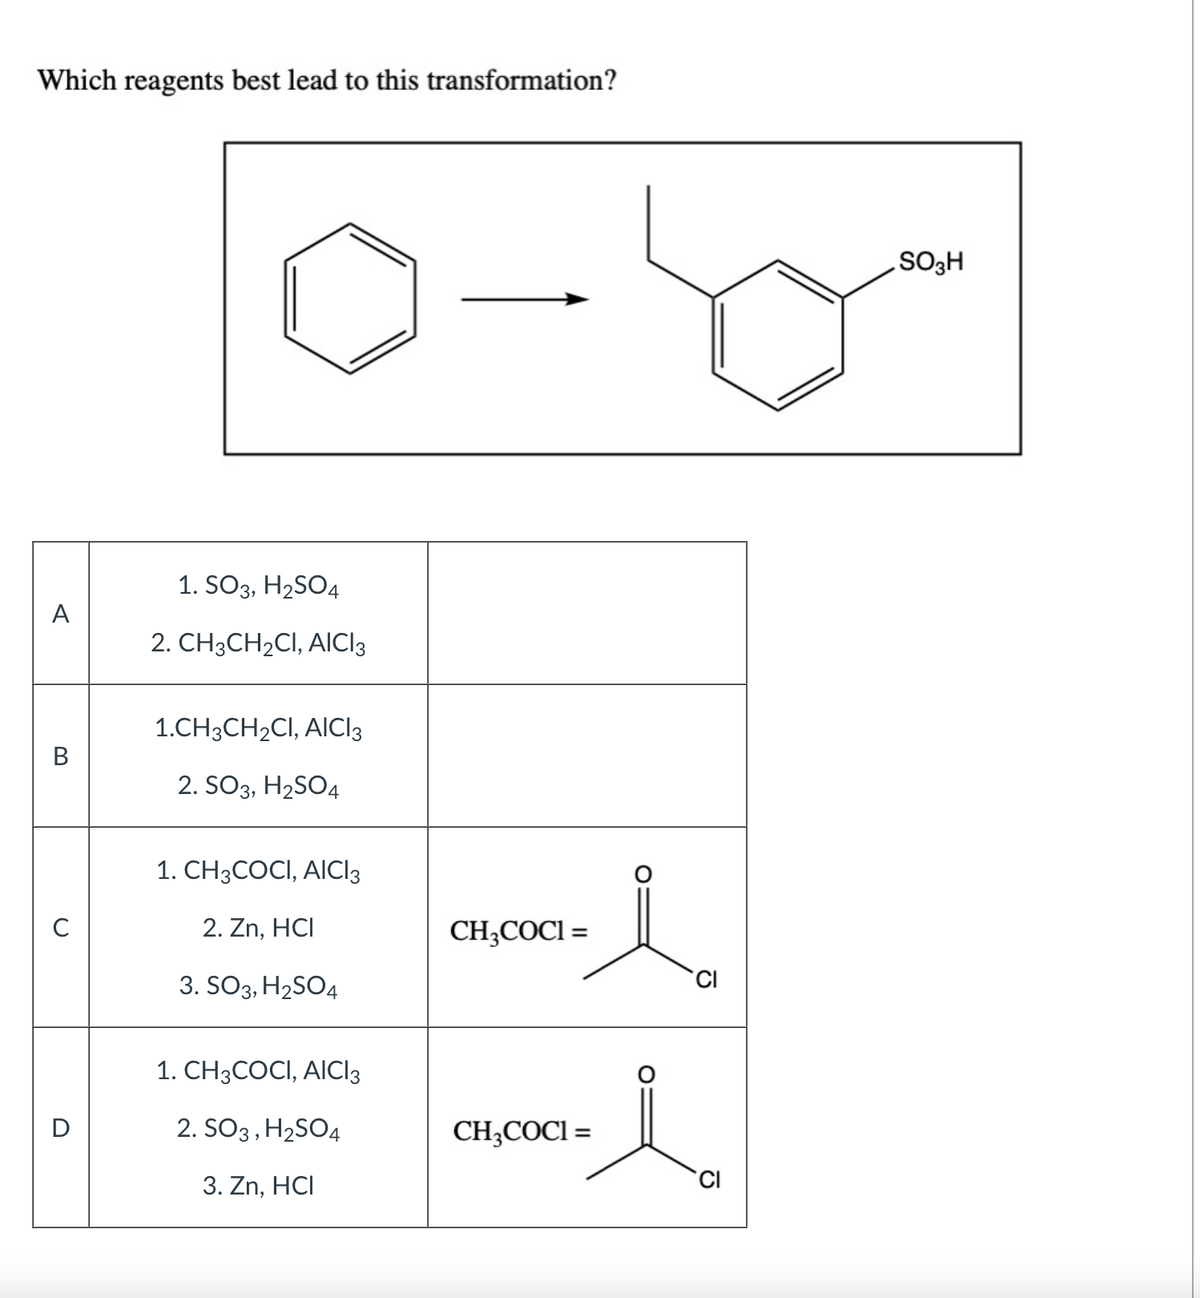 Which reagents best lead to this transformation?
A
B
C
1. SO3, H₂SO4
2. CH3CH₂CI, AICI 3
1.CH3CH₂CI, AICI 3
2. SO3, H₂SO4
1. CH3COCI, AICI3
2. Zn, HCI
3. SO3, H₂SO4
1. CH3COCI, AICI3
2. SO3, H₂SO4
3. Zn, HCI
-50-
CH3COCI=
CH₂COCI=
i
l
SO3H